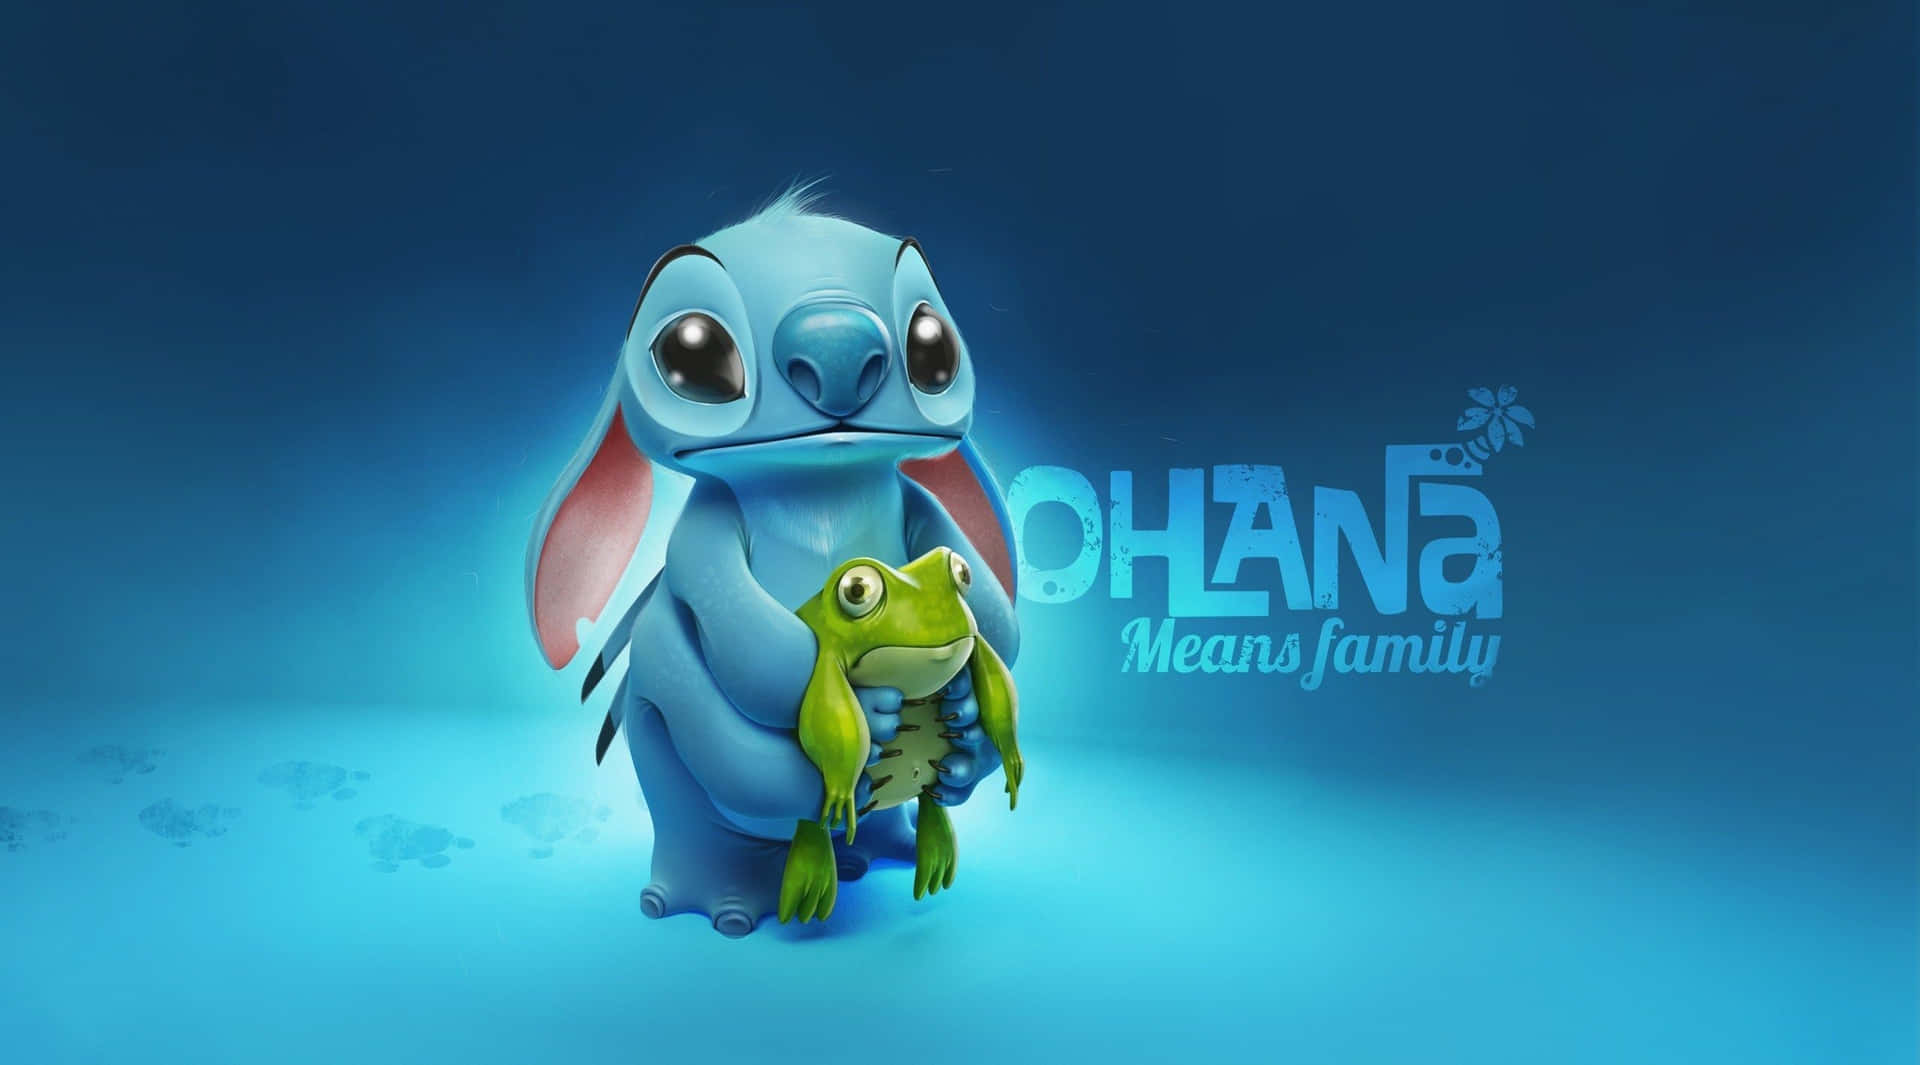 Adorable Lilo and Stitch enjoying their fun moments together Wallpaper